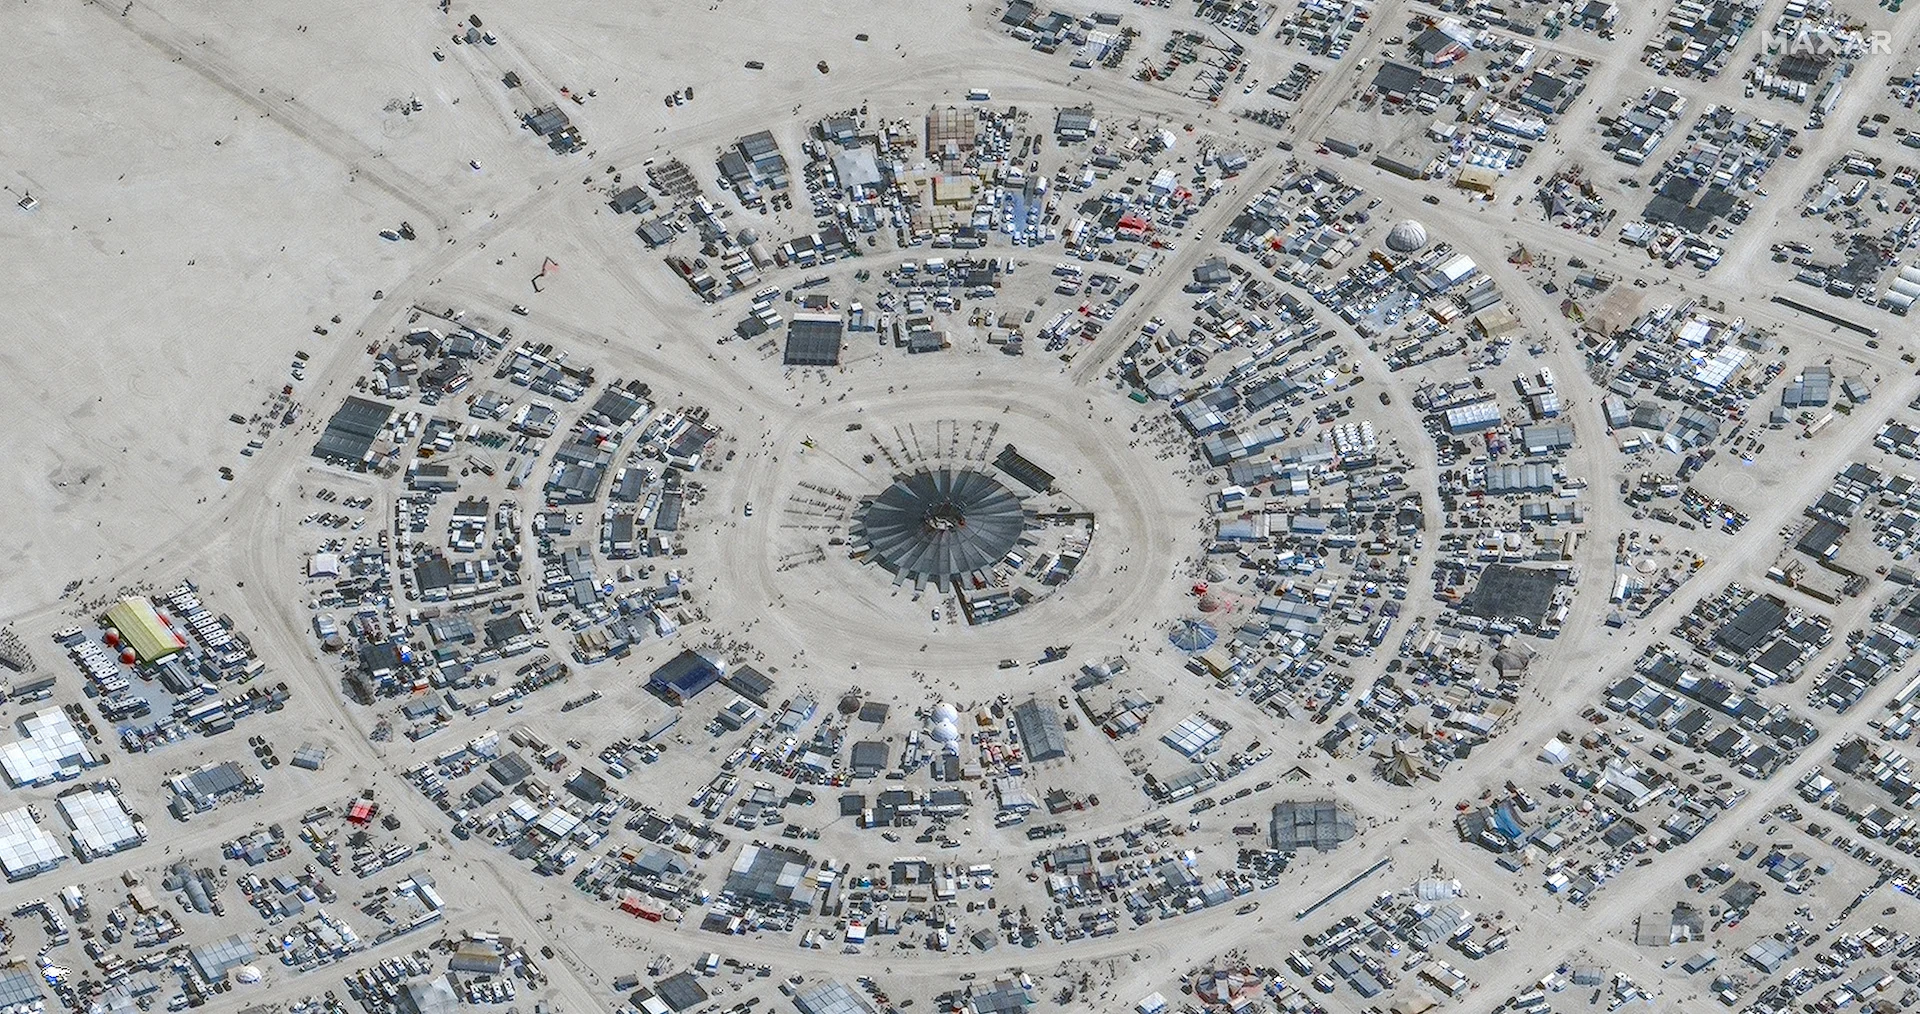 One death reported at Burning Man, thousands stranded in mud and rain